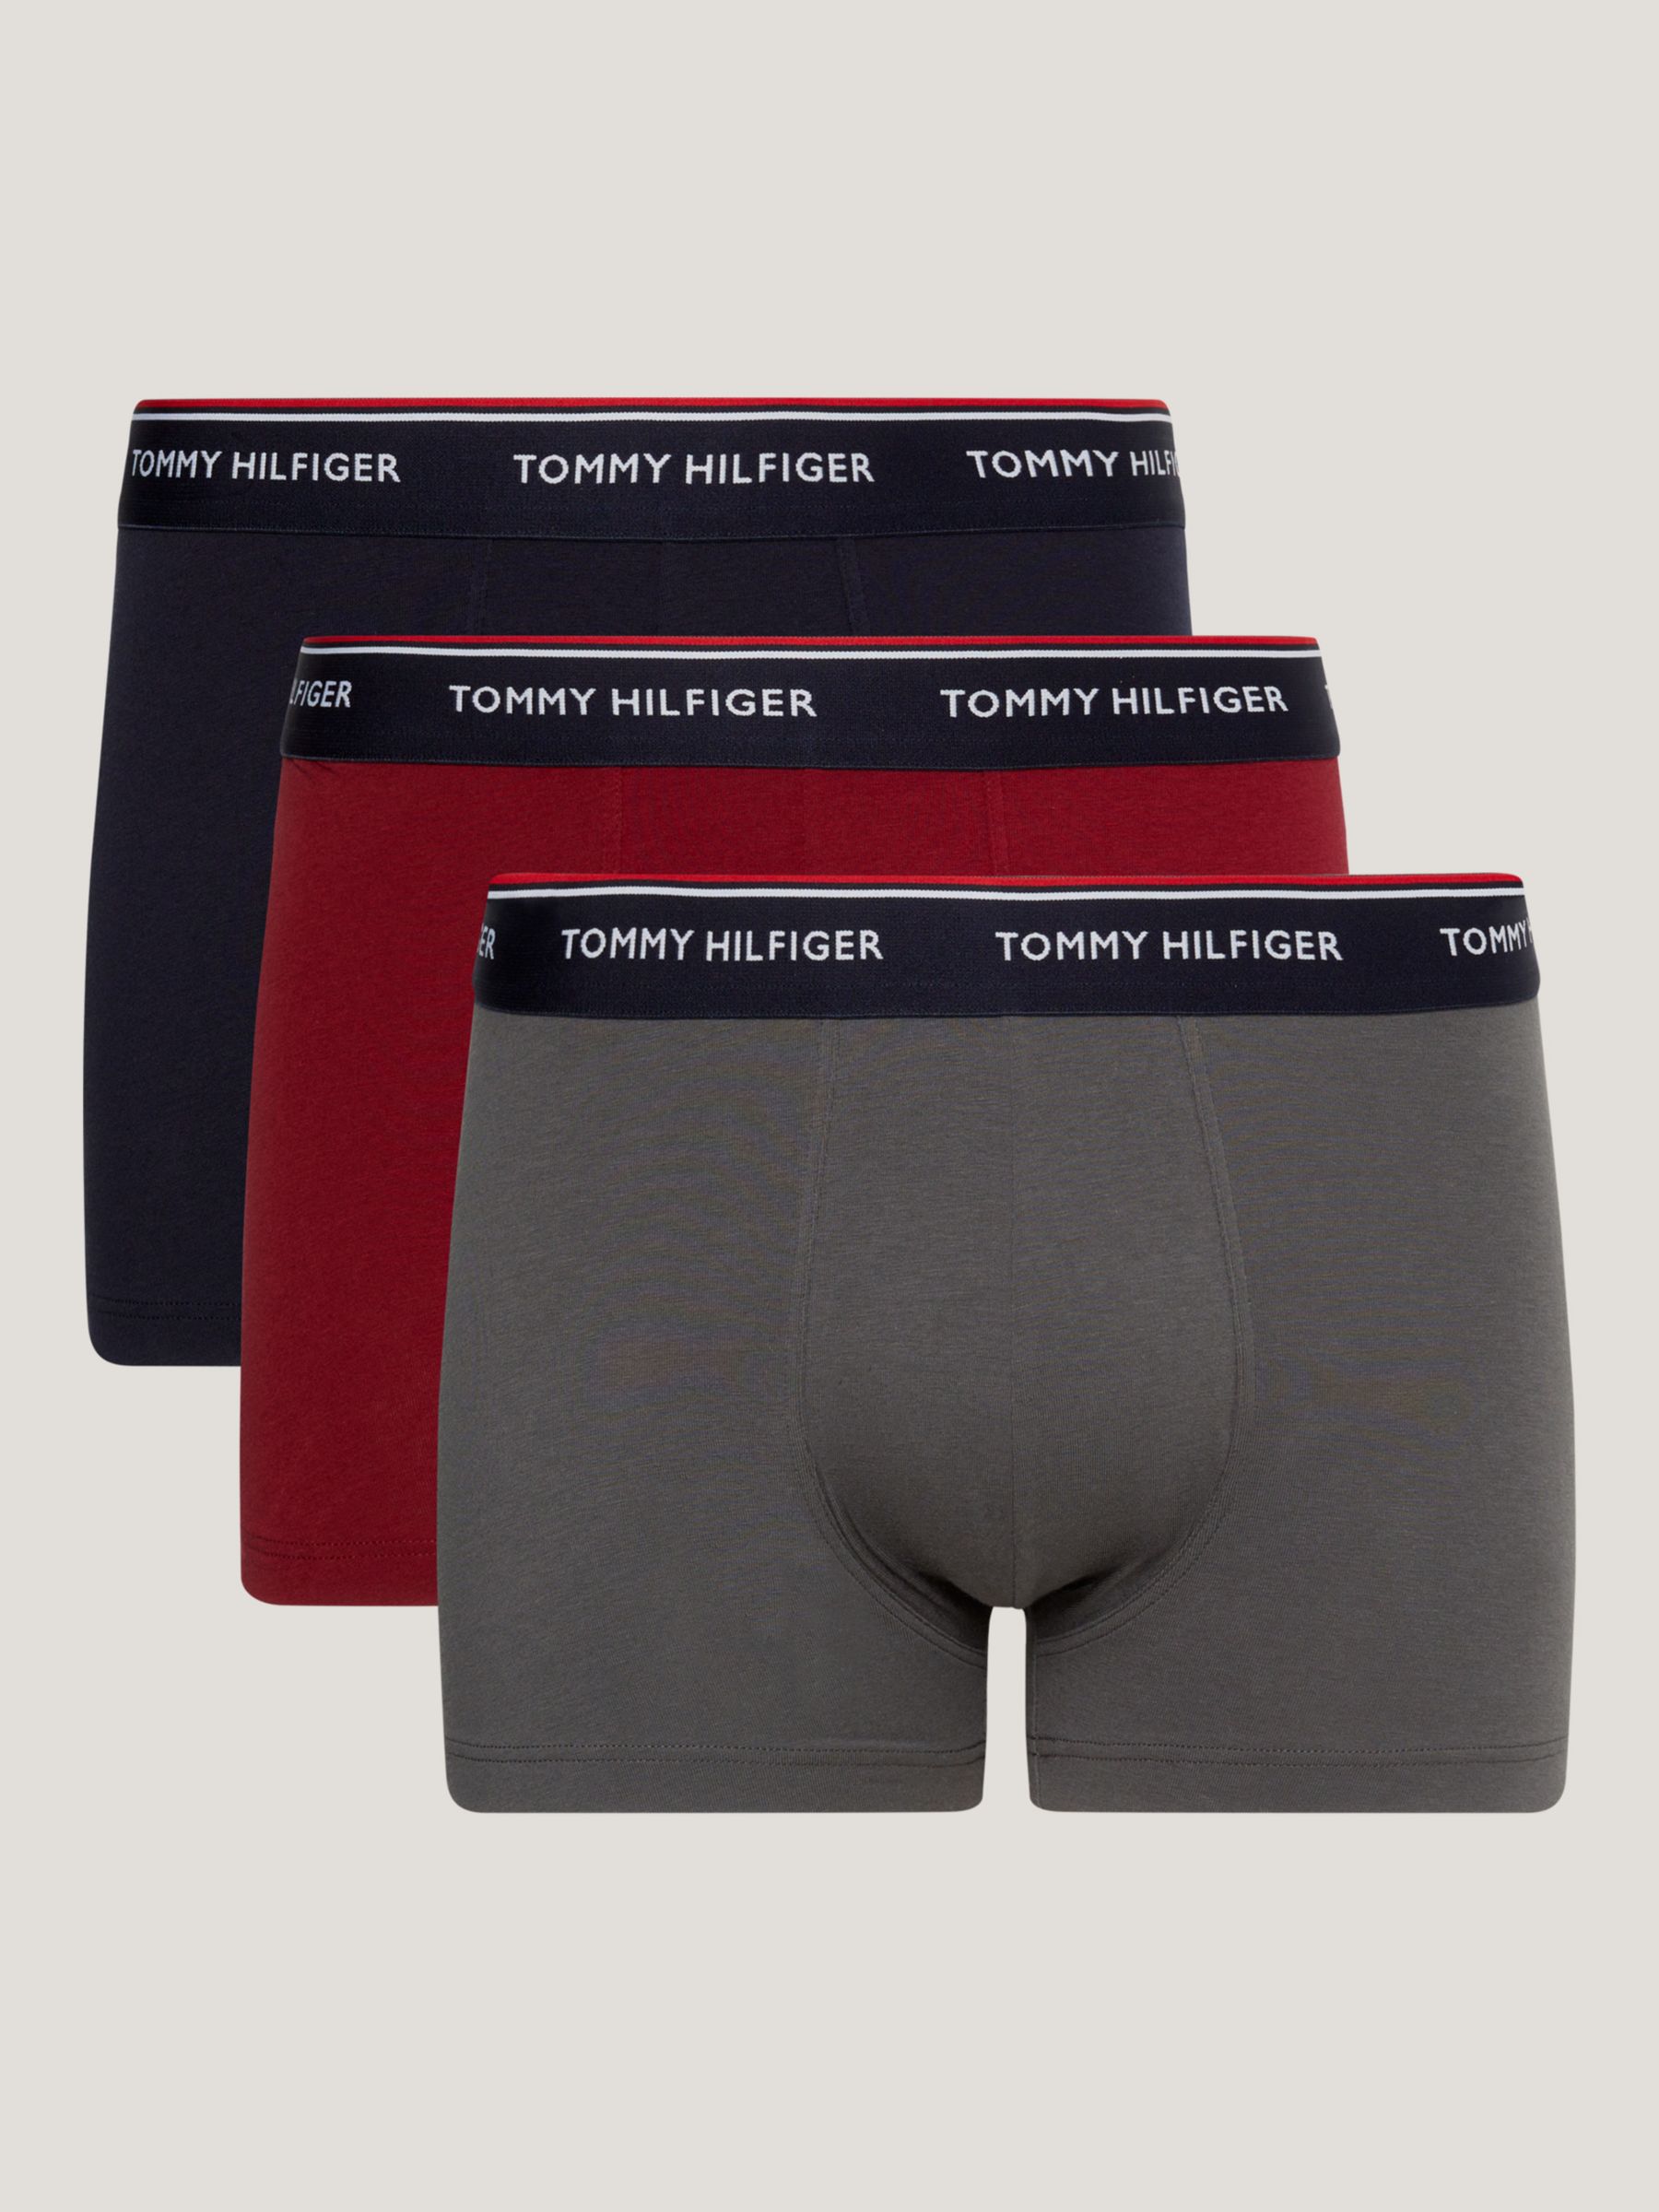 Tommy Hilfiger Premium Essentials Trunks, Pack of 3, Sky/Ash/Rouge, S